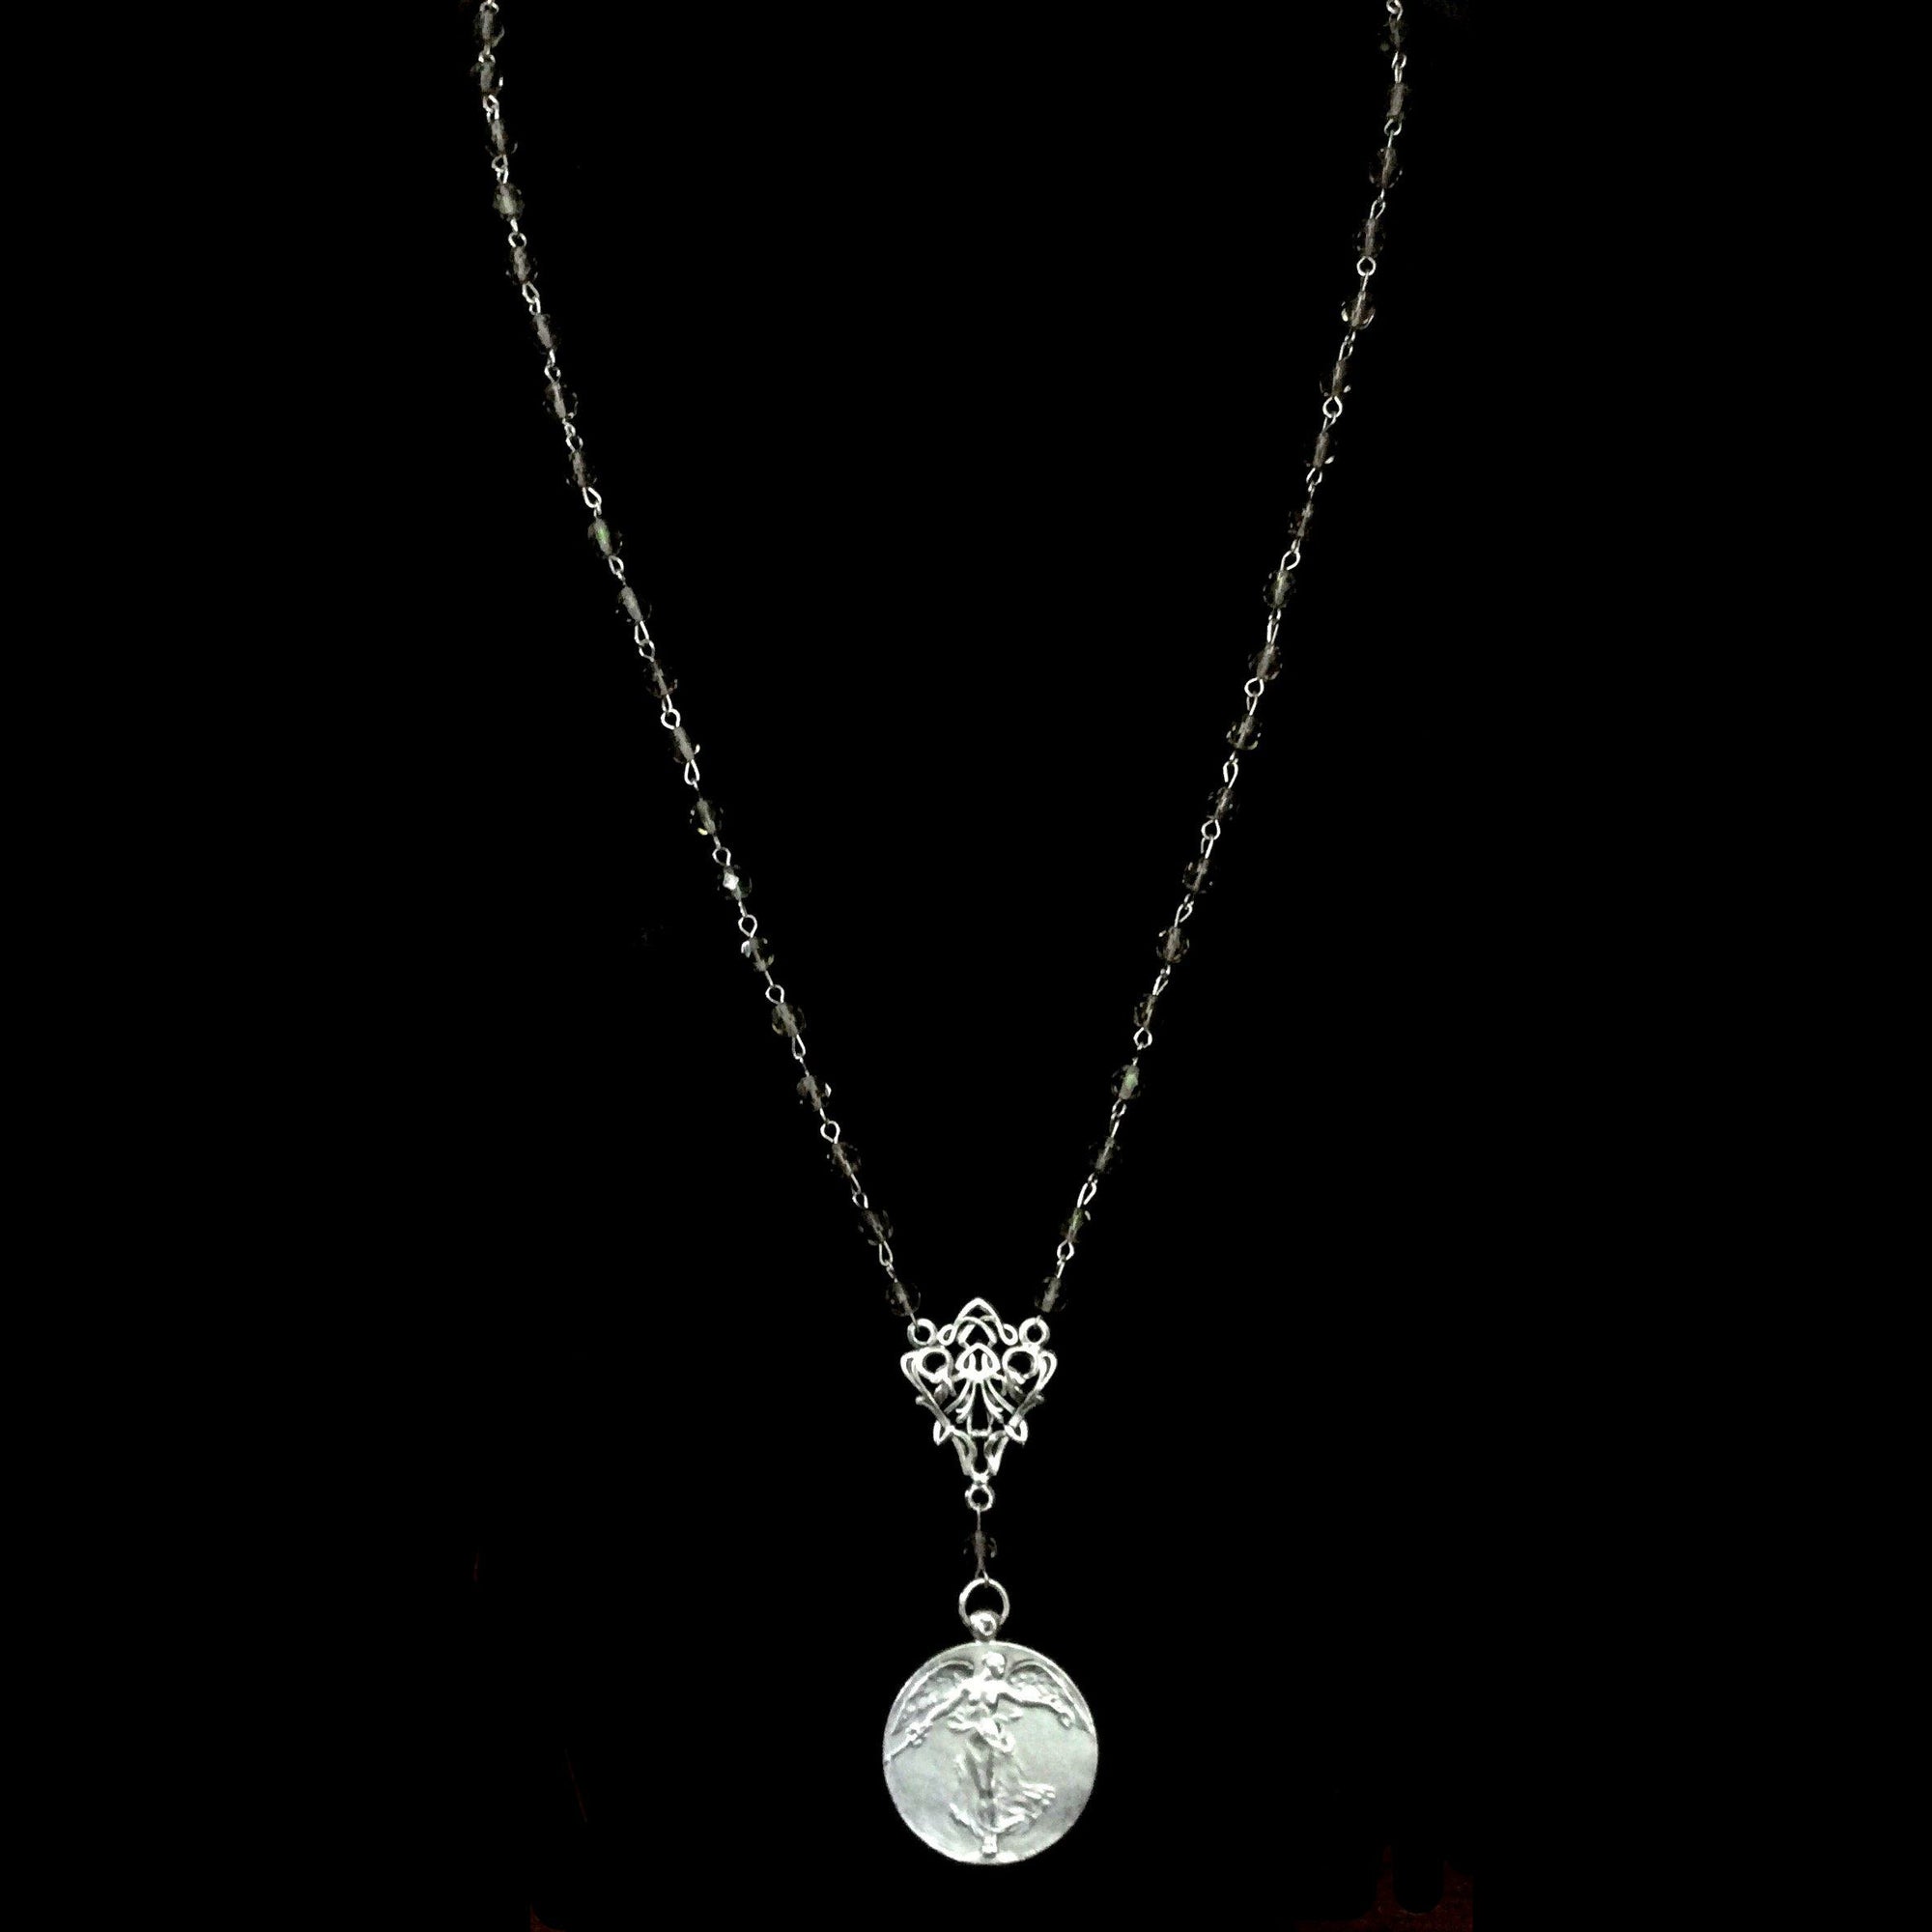 Peace Angel Medallion Black Diamond & Silver Necklace by Whispering Goddess